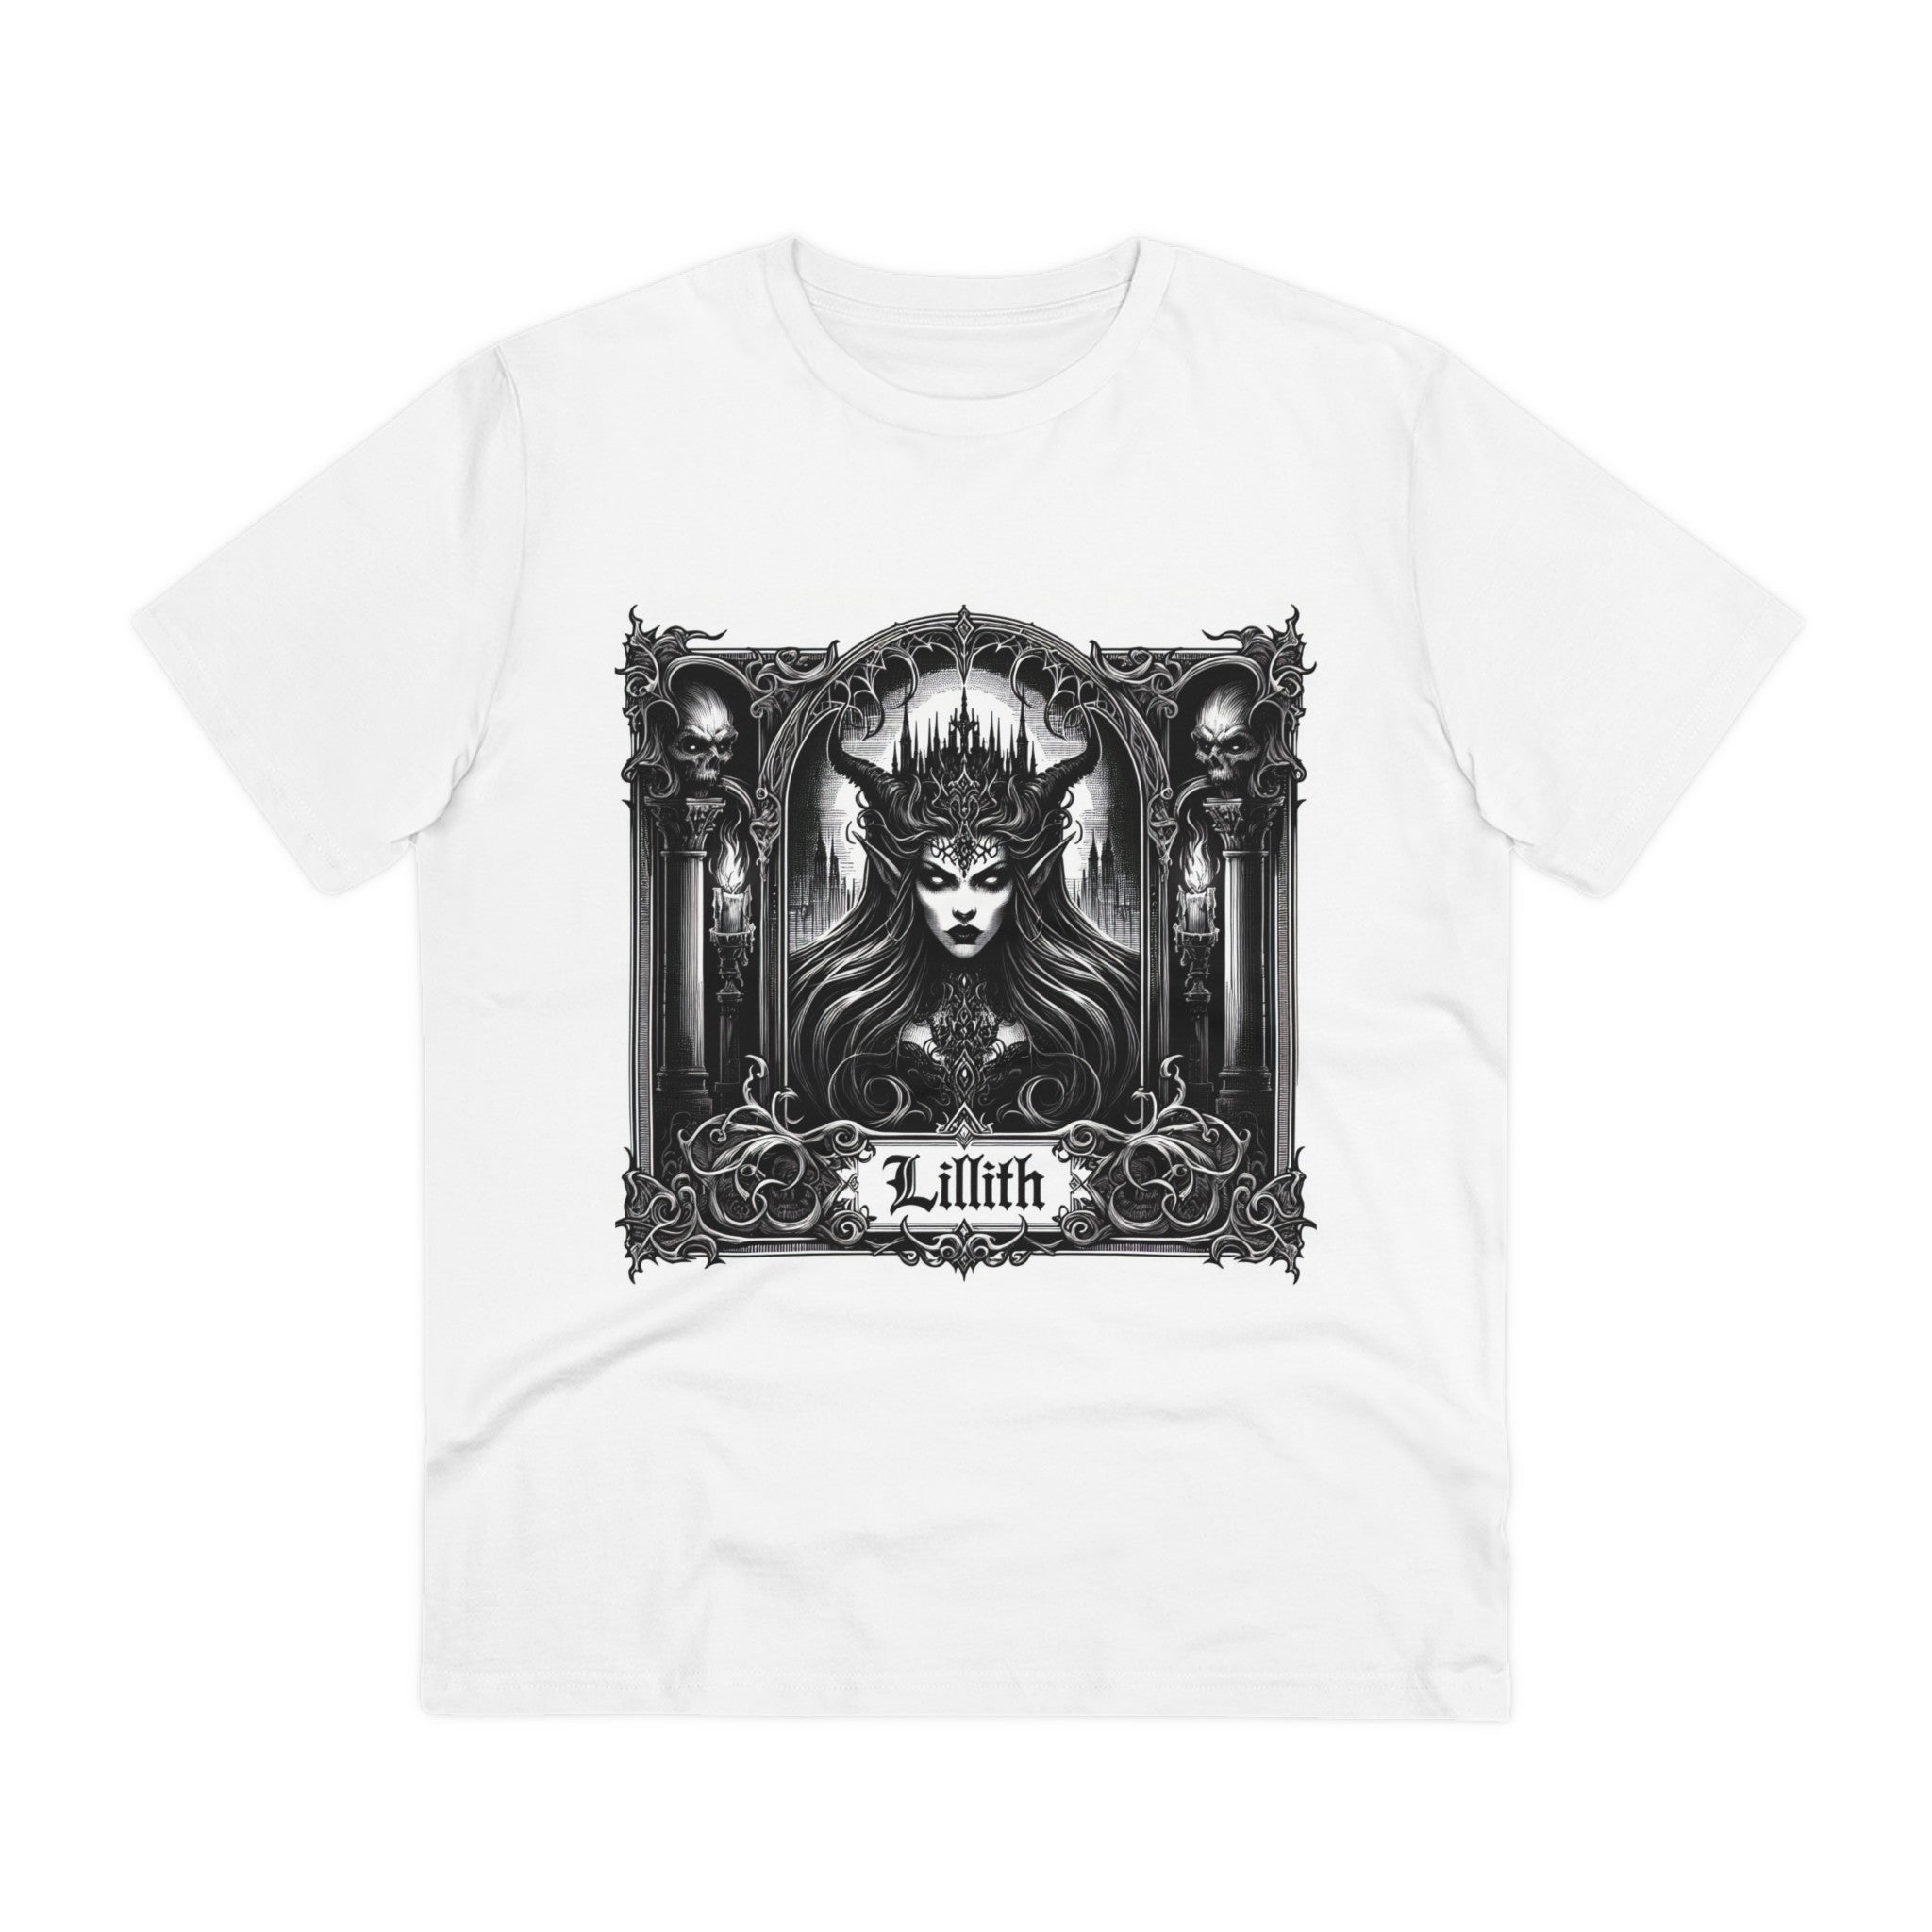 ’Mystique of Lilith - Enchanting T-shirt’ - White / XS